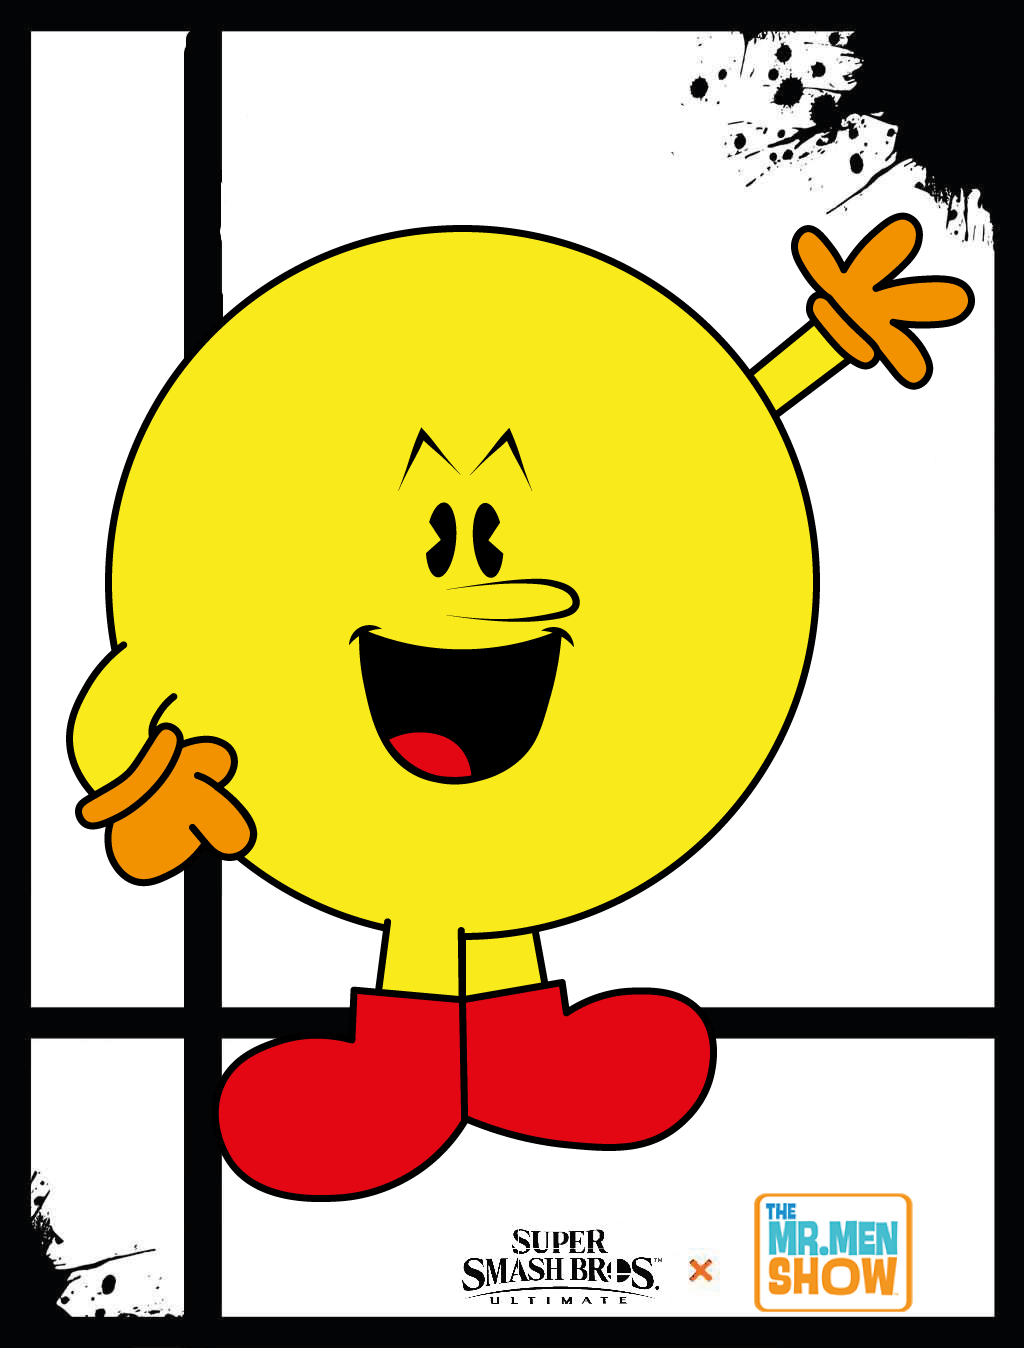 What if Pac-Man was in The Mr. Men Show Style? by ChiareyChan on DeviantArt